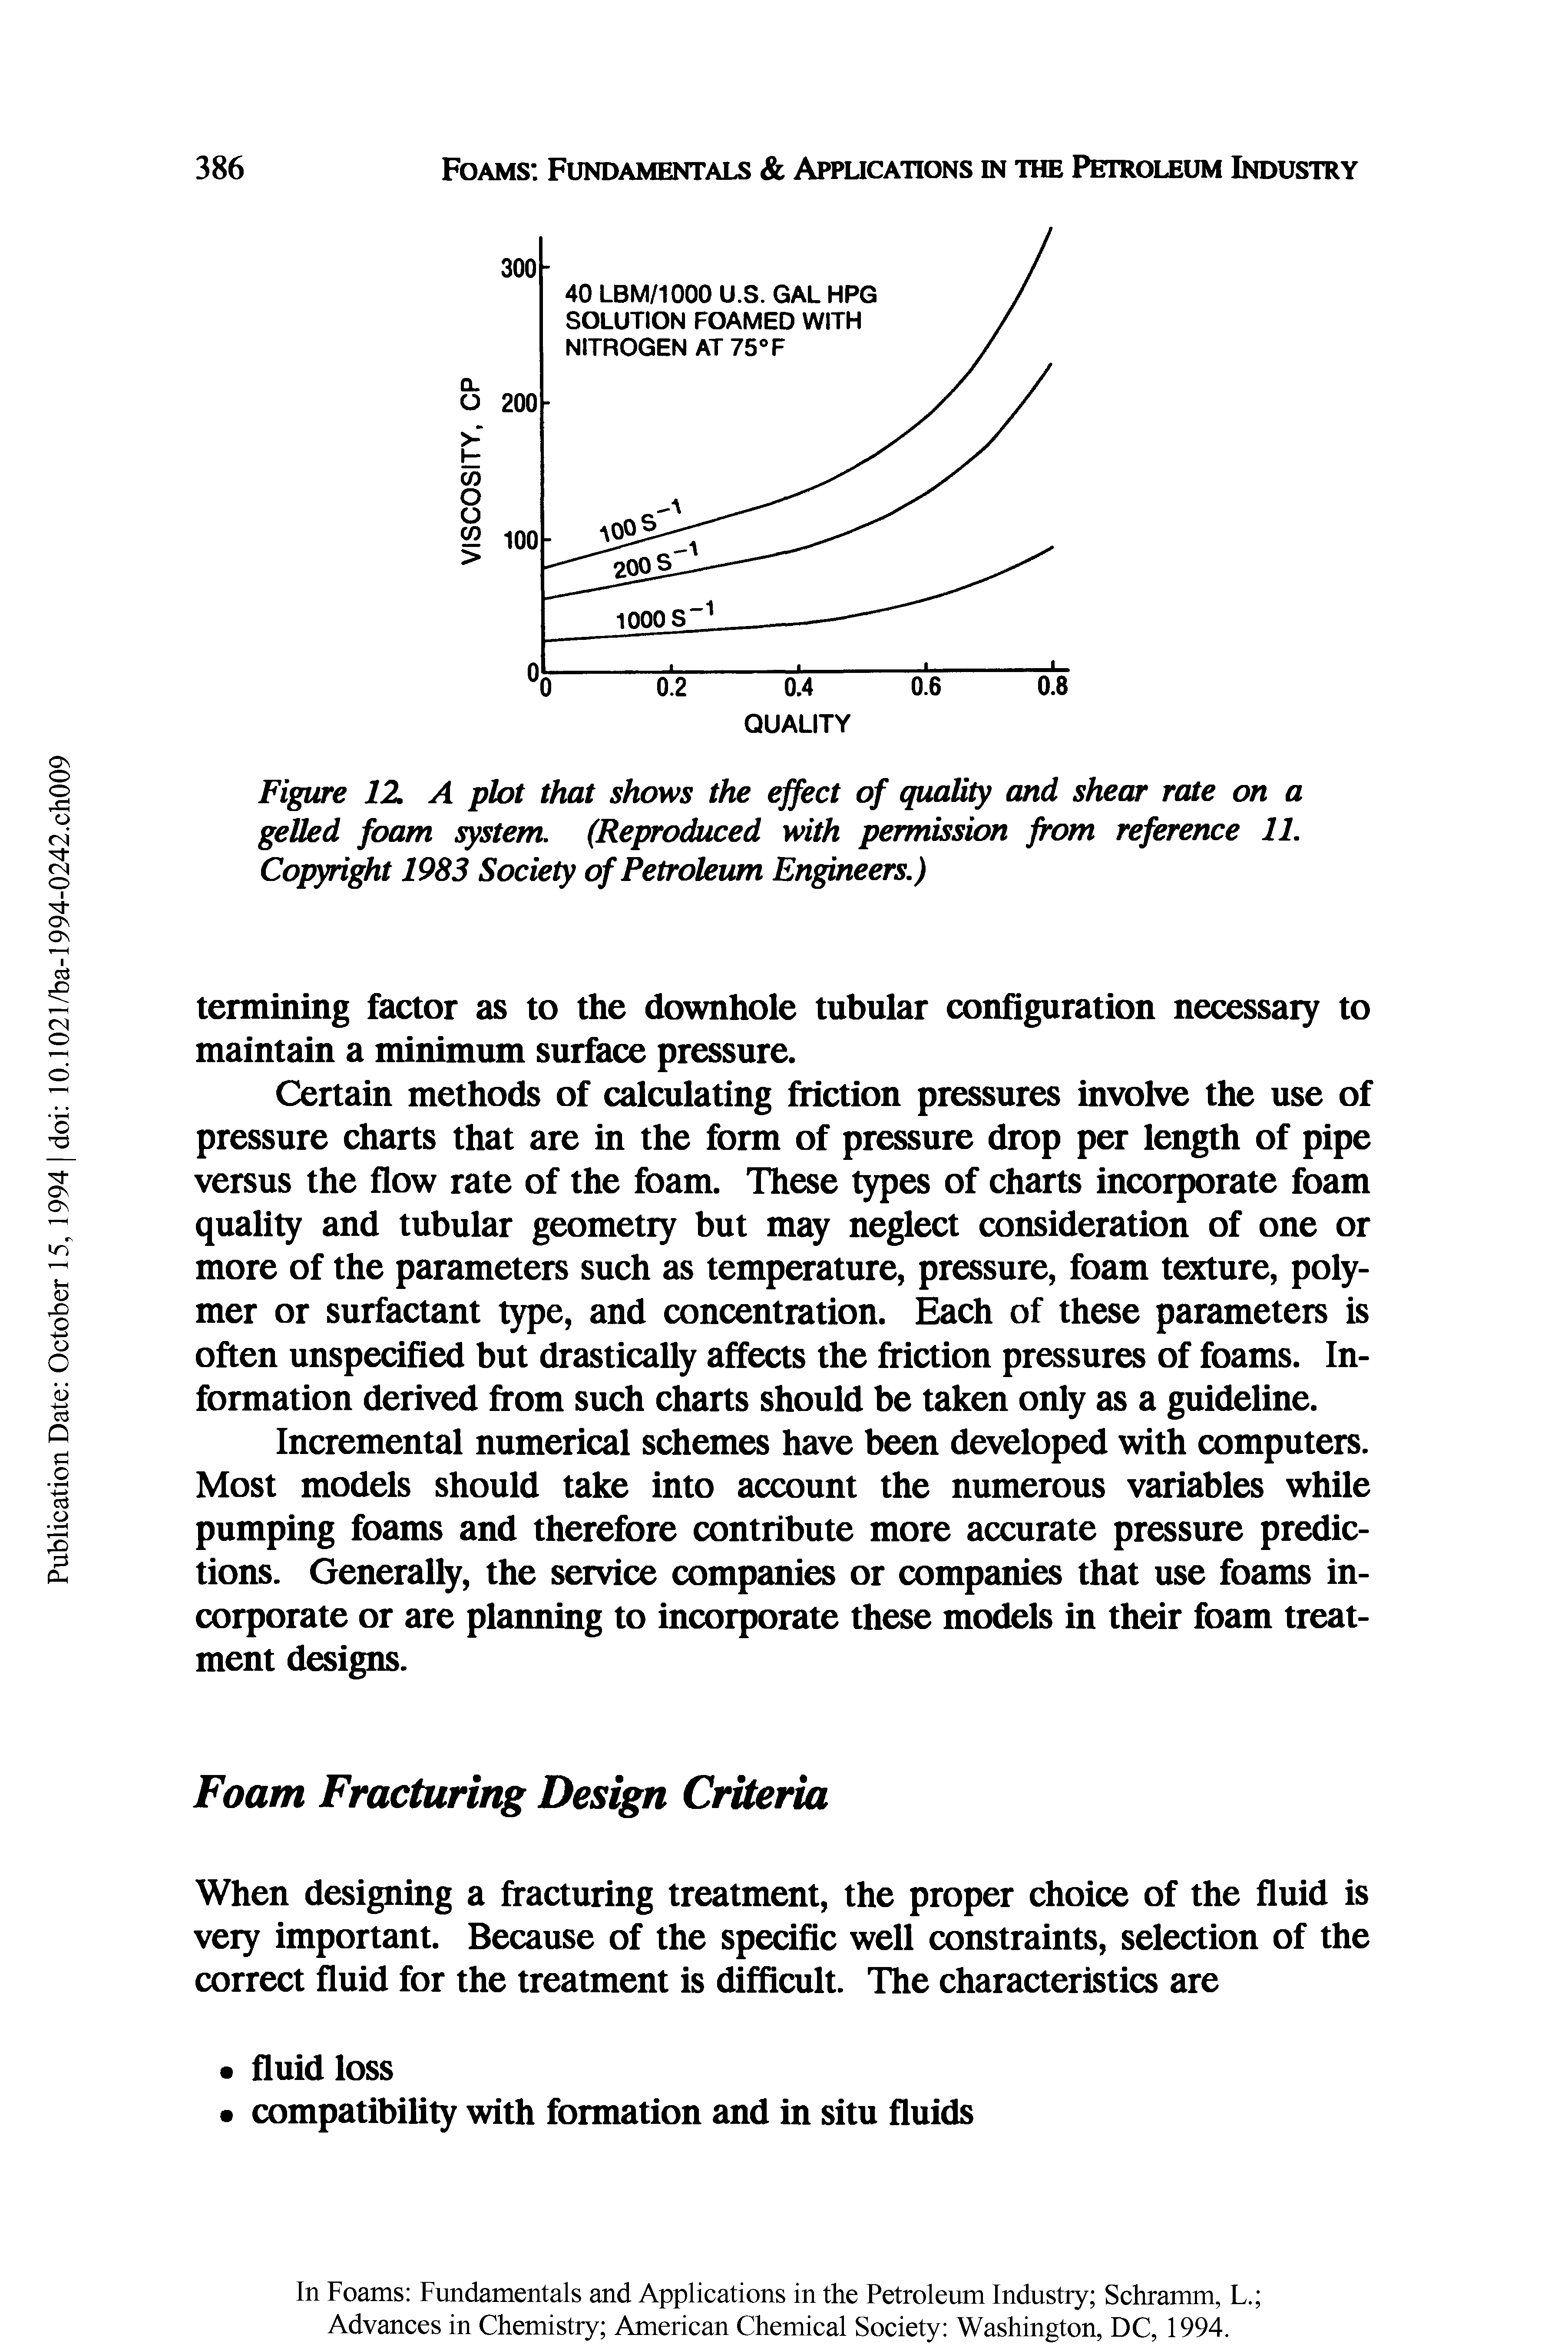 Figure 12. A plot that shows the effect of quality and shear rate on a gelled foam system. (Reproduced with permission from reference 11. Copyright 1983 Society of Petroleum Engineers.)...